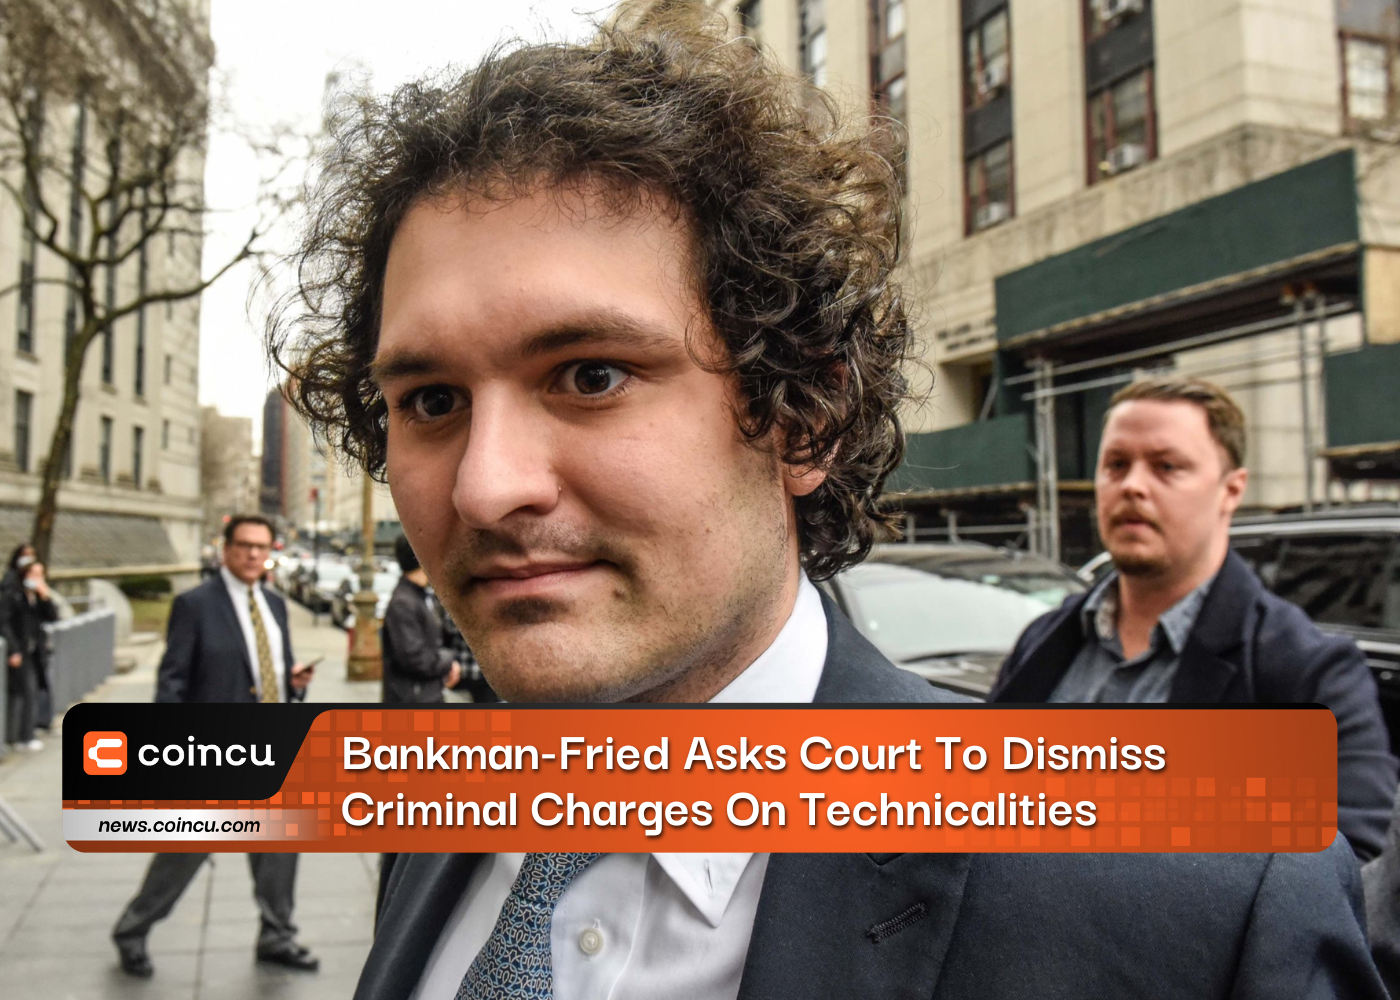 Bankman-Fried Asks Court To Dismiss Criminal Charges On Technicalities